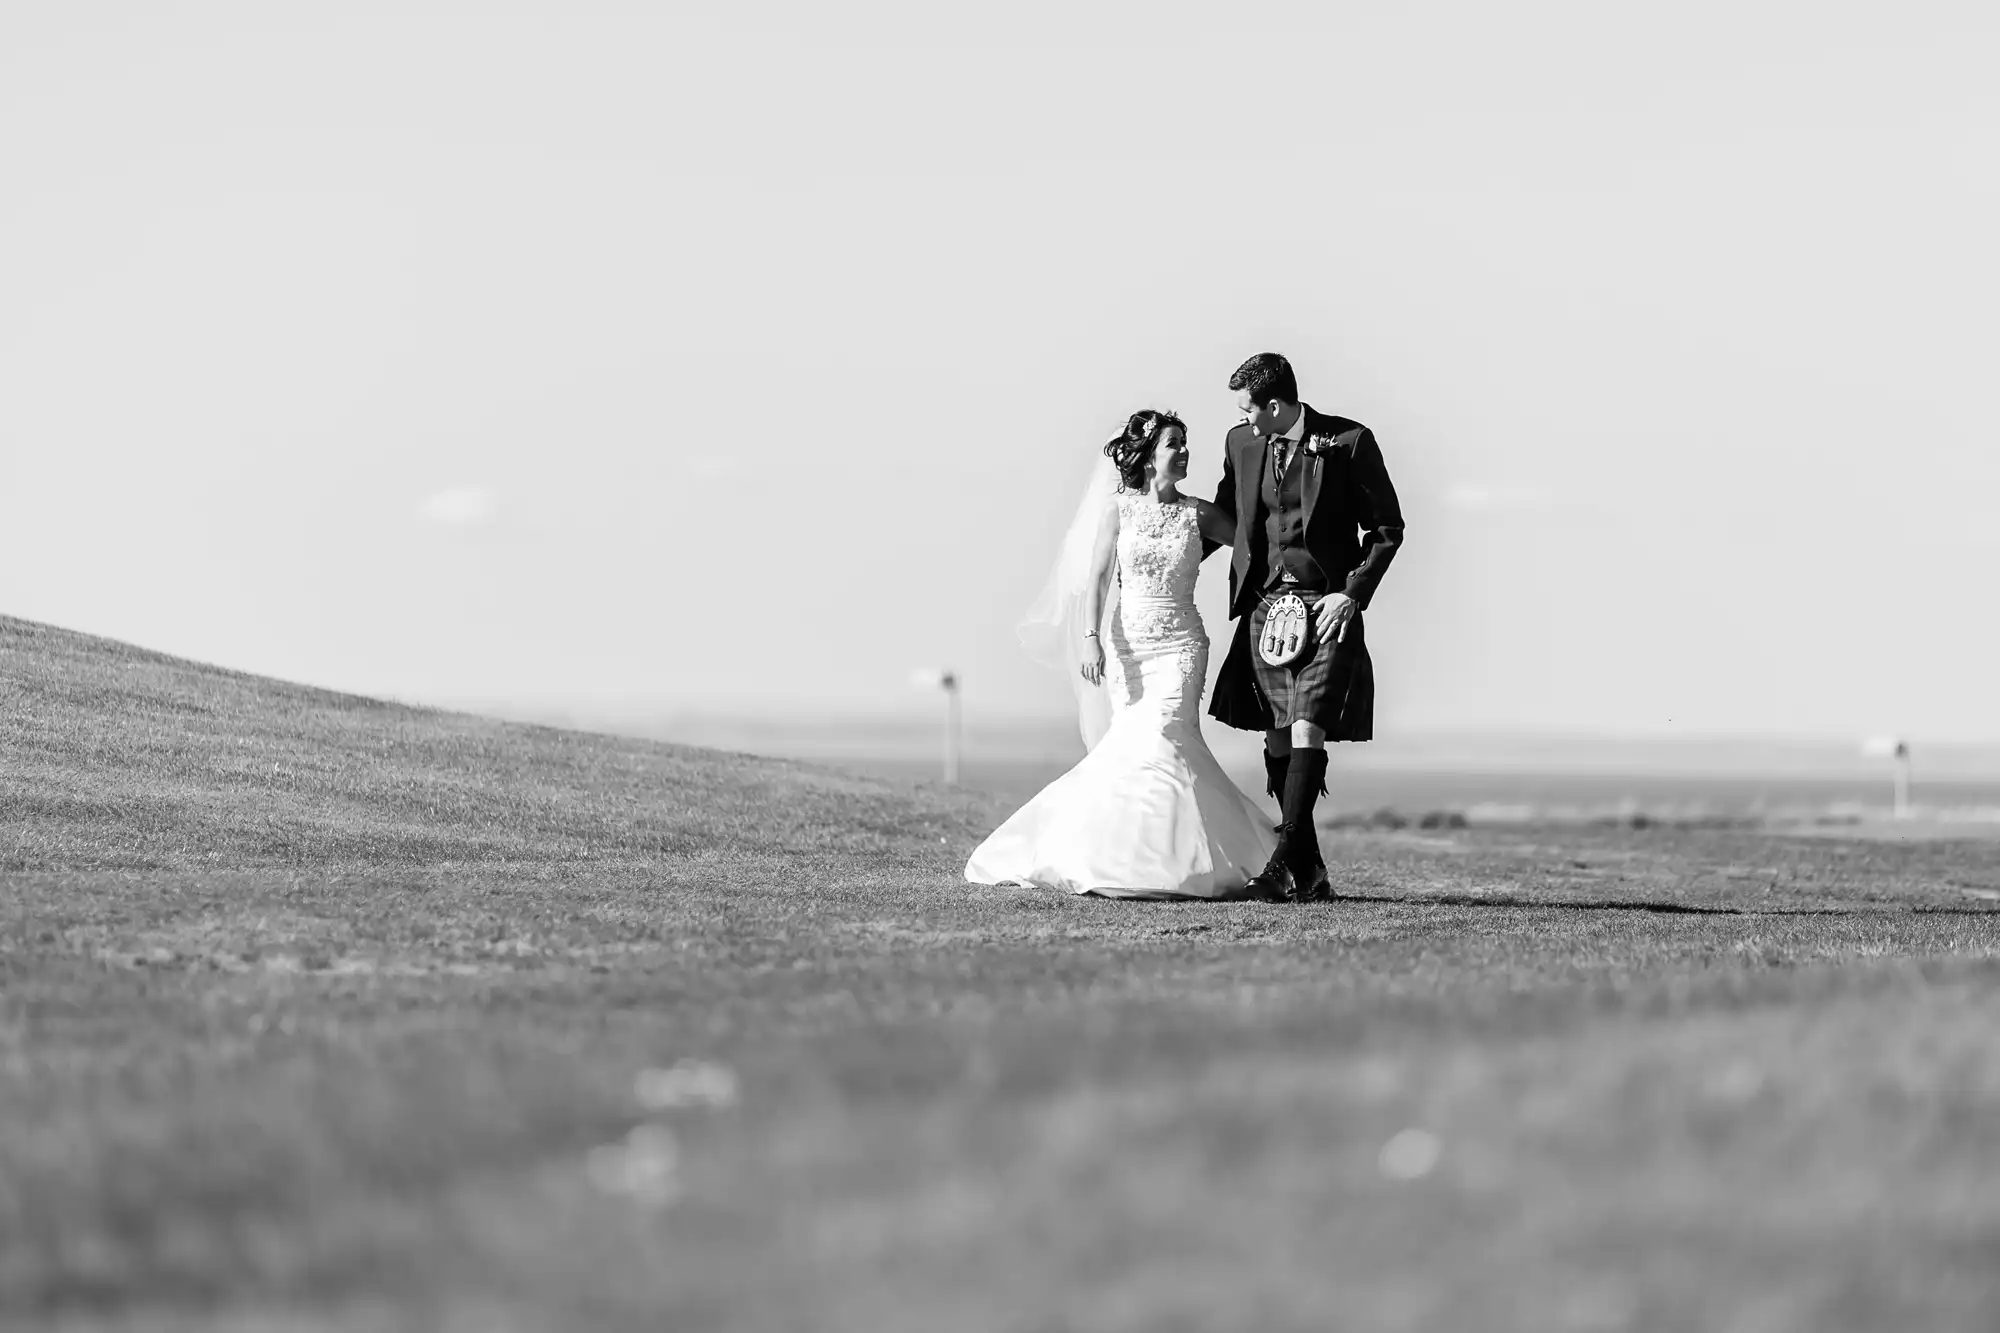 A bride and groom in formal wedding attire hold hands on a vast, grassy field under a clear sky, standing together in a serene black and white setting.